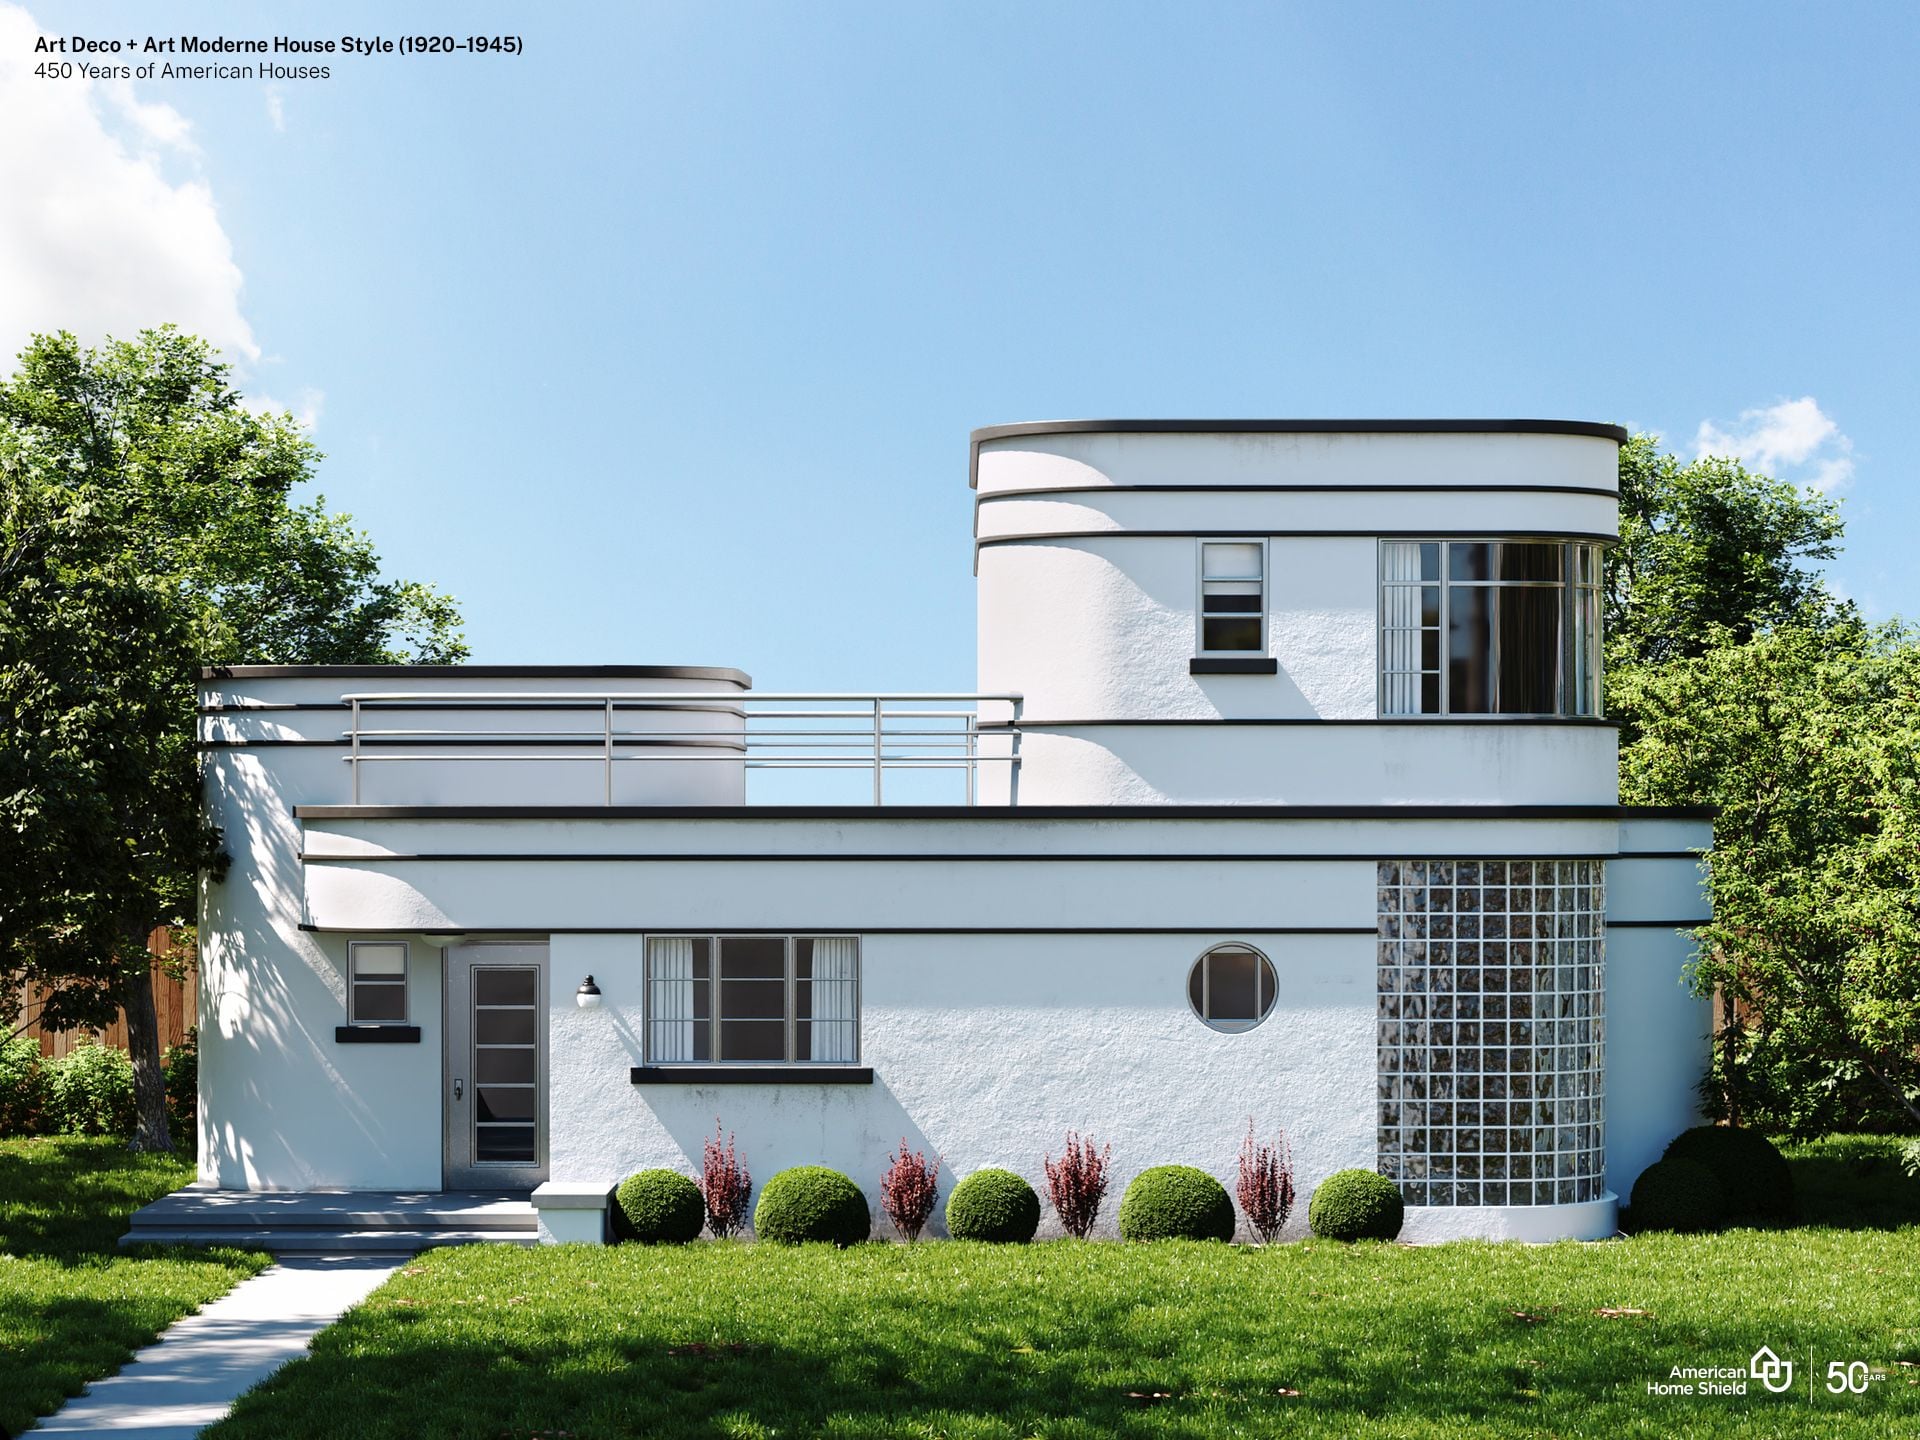 American Home Shield's re-creation of an Art Deco-style home, popular from 1920 to 1945.